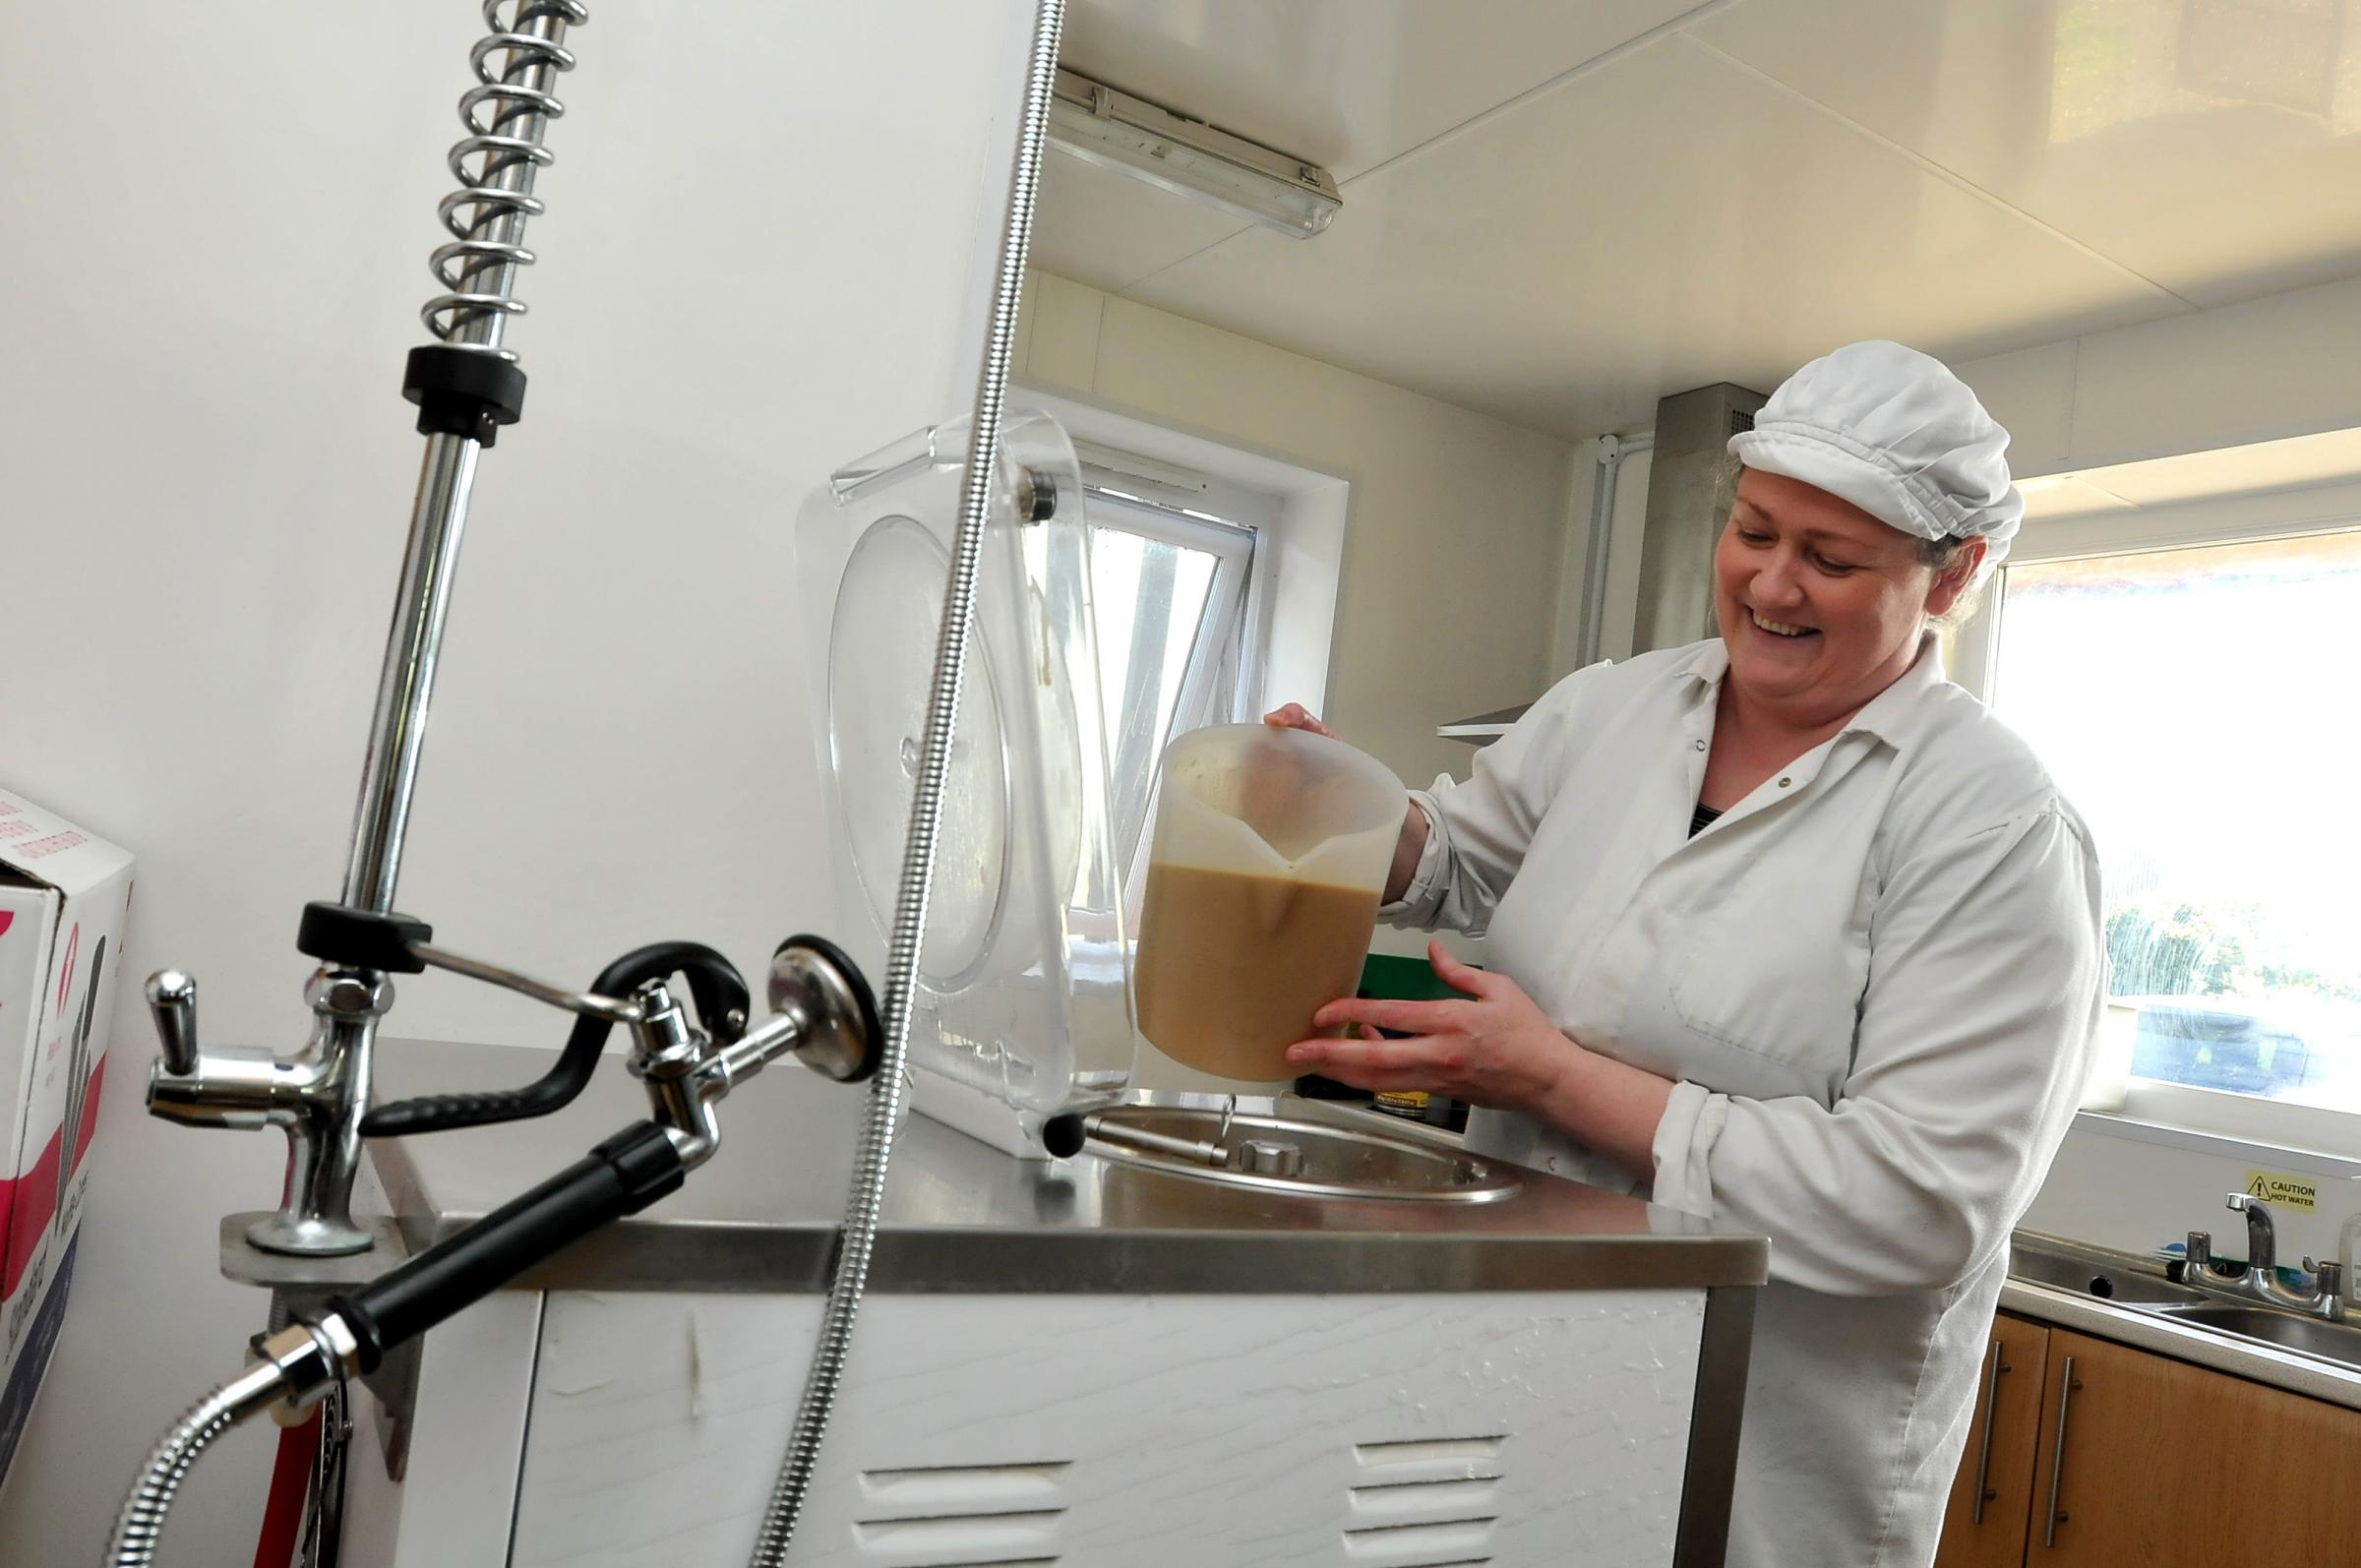 Emma Whitlow helps to make the ice cream on site